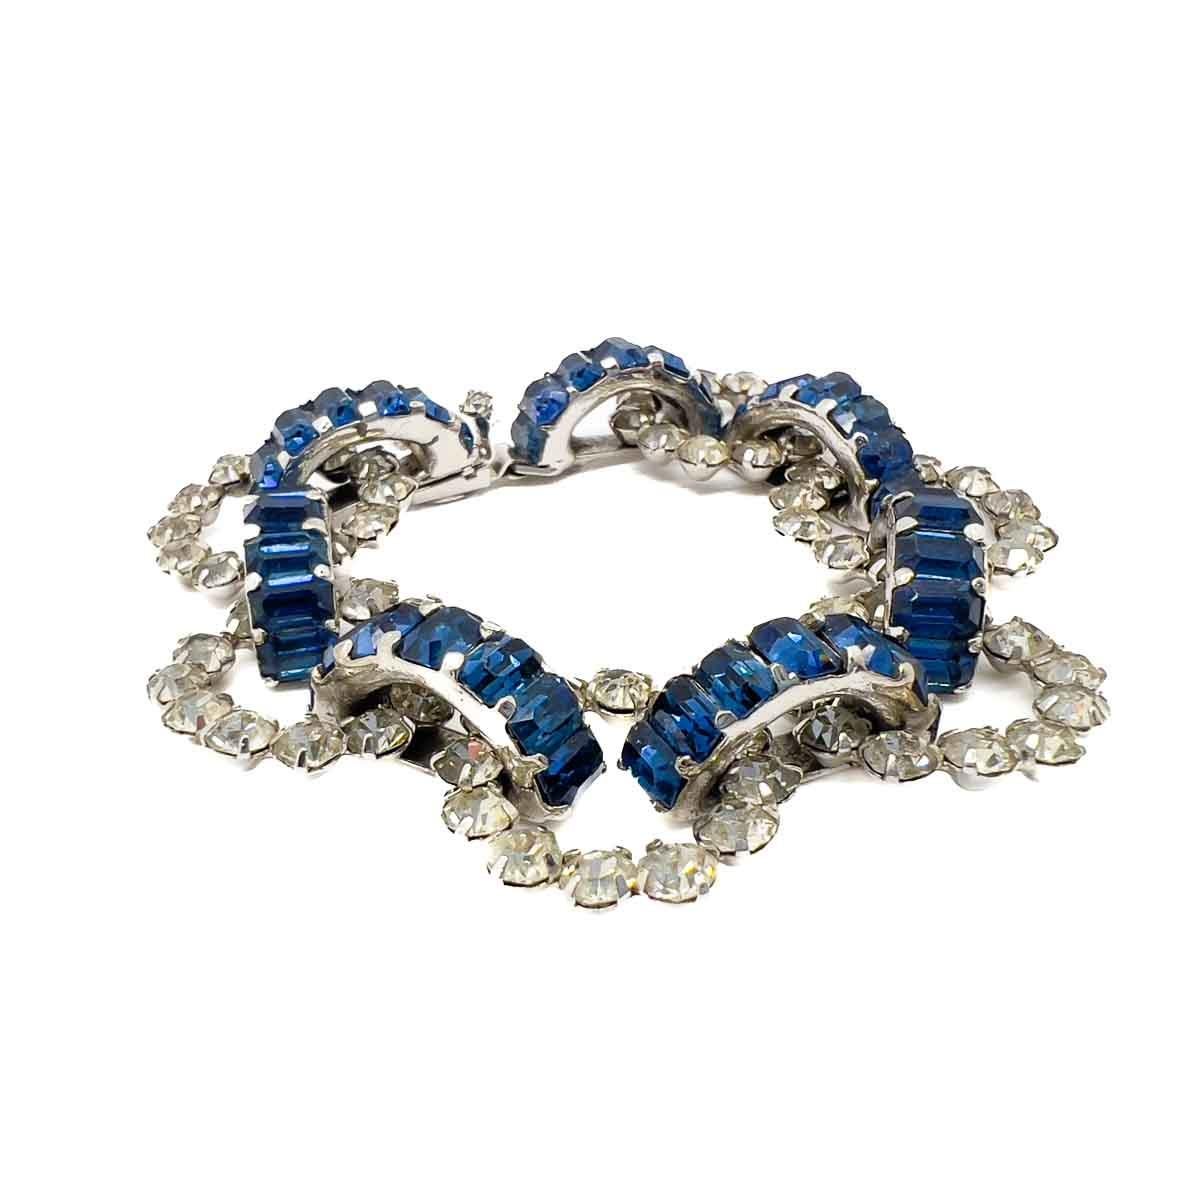 A beautiful Vintage Dior by Mitchel Maer Sapphire Bracelet. Encapsulating the important relationship between Mitchel Maer and Christian Dior this delightful faux sapphire and diamond bracelet, featuring fancy emerald cut crystals, is the epitome of